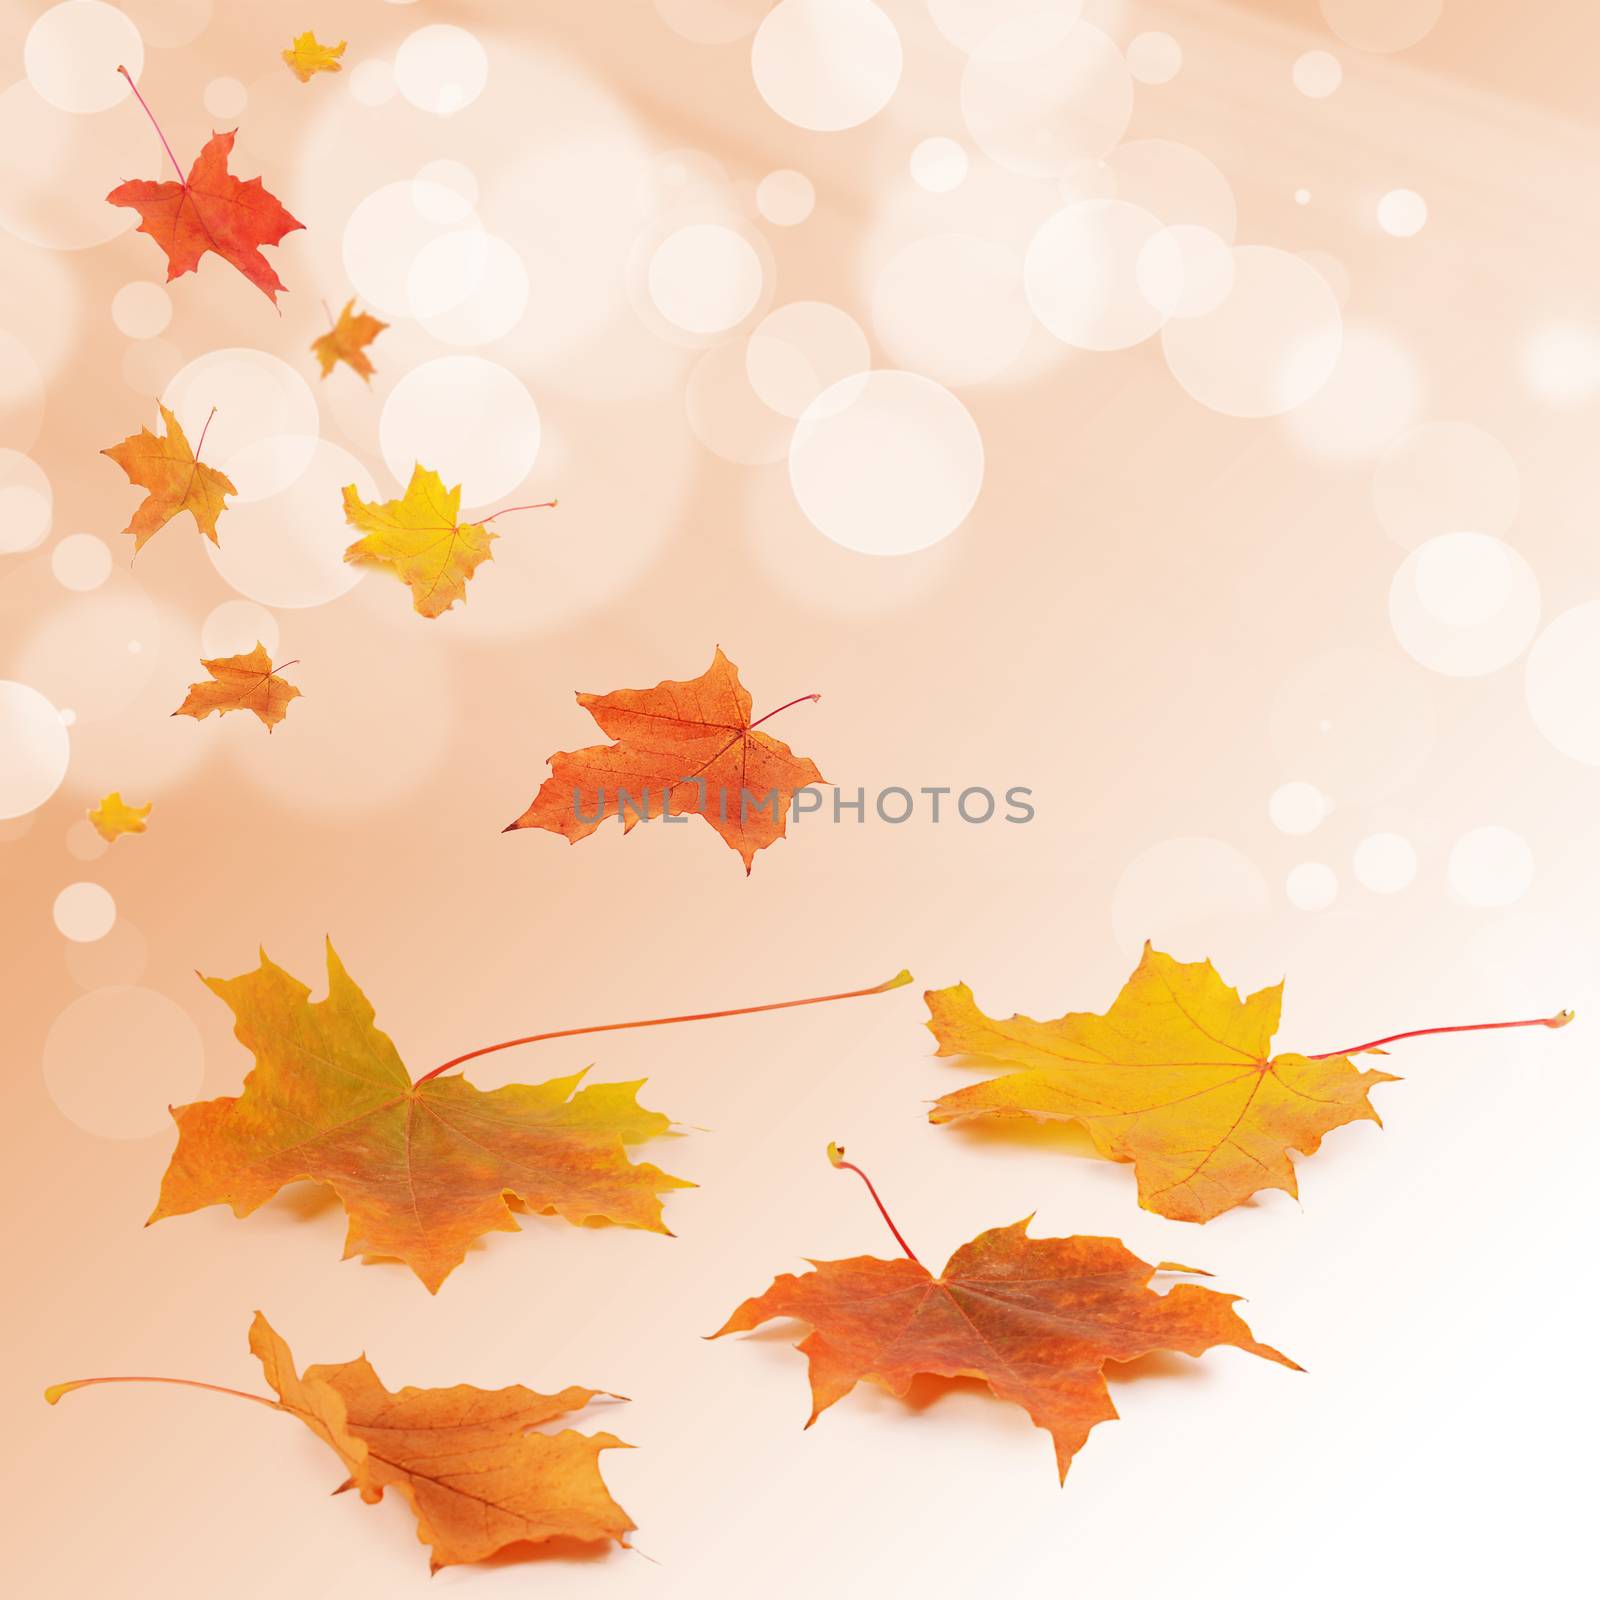 The autumn maple leaves a background by SvetaVo